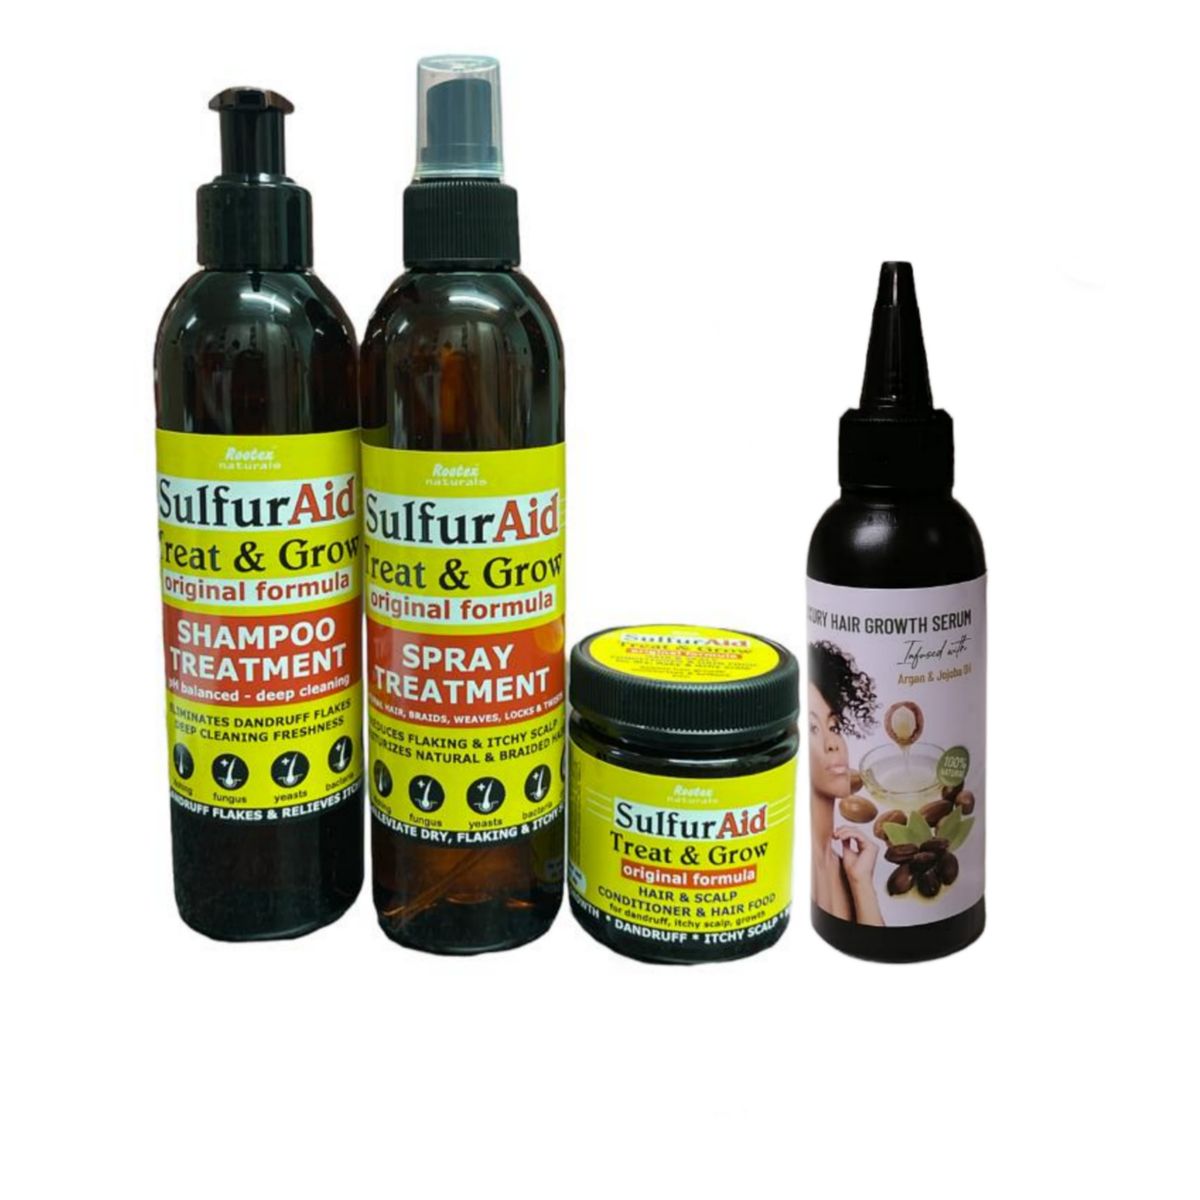 Sulfur Aid Treat & Grow Shampoo, Spray, Hairfood with Luxury Growth Serum |  Buy Online in South Africa 